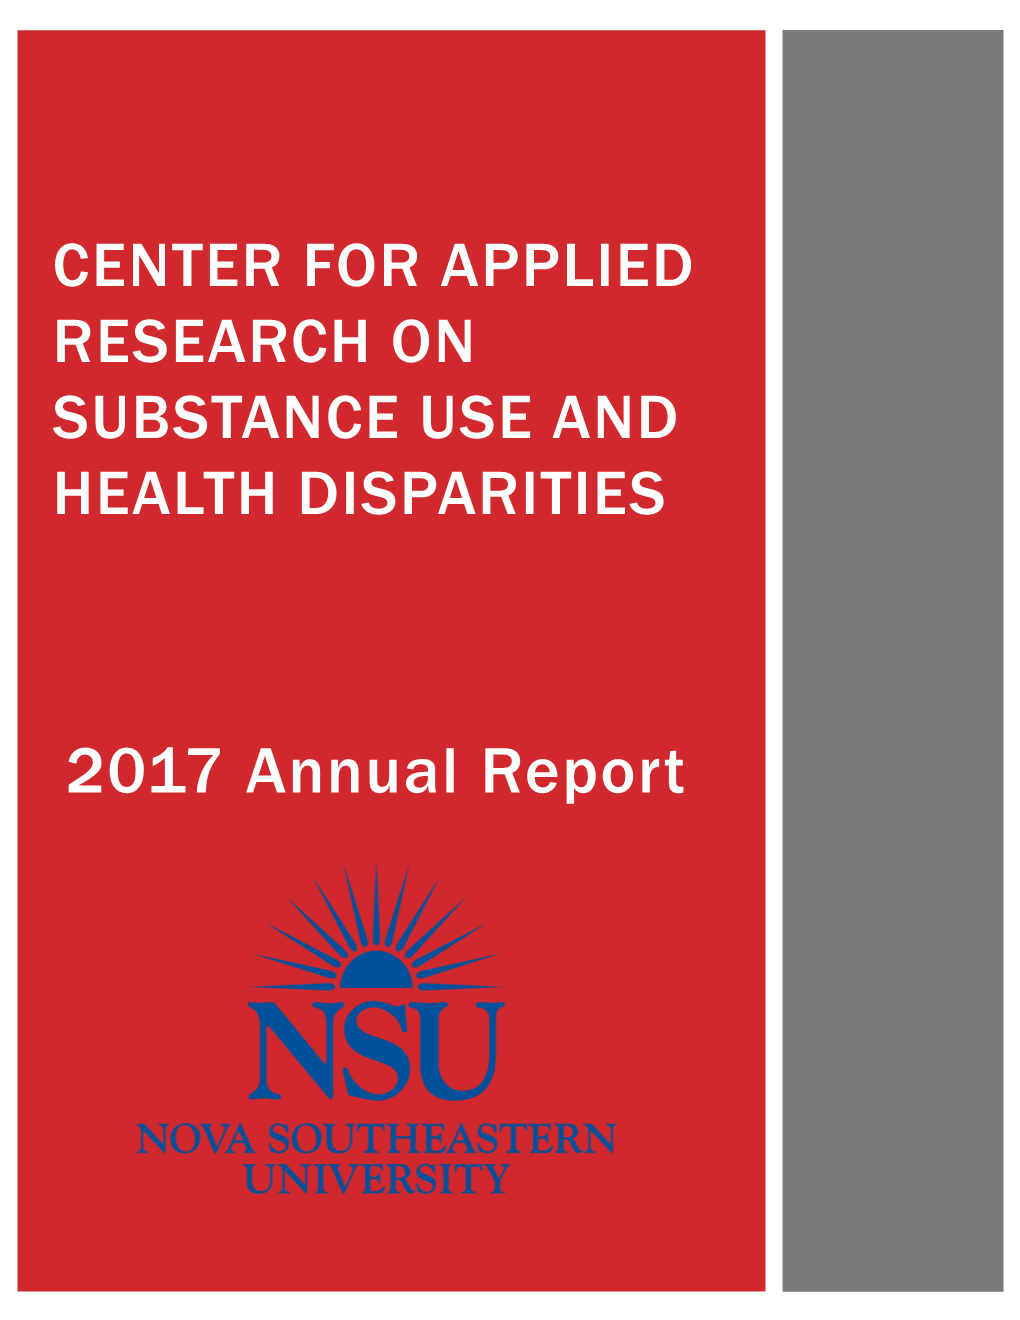 Center for Applied Research on Substance Use and Health Disparities